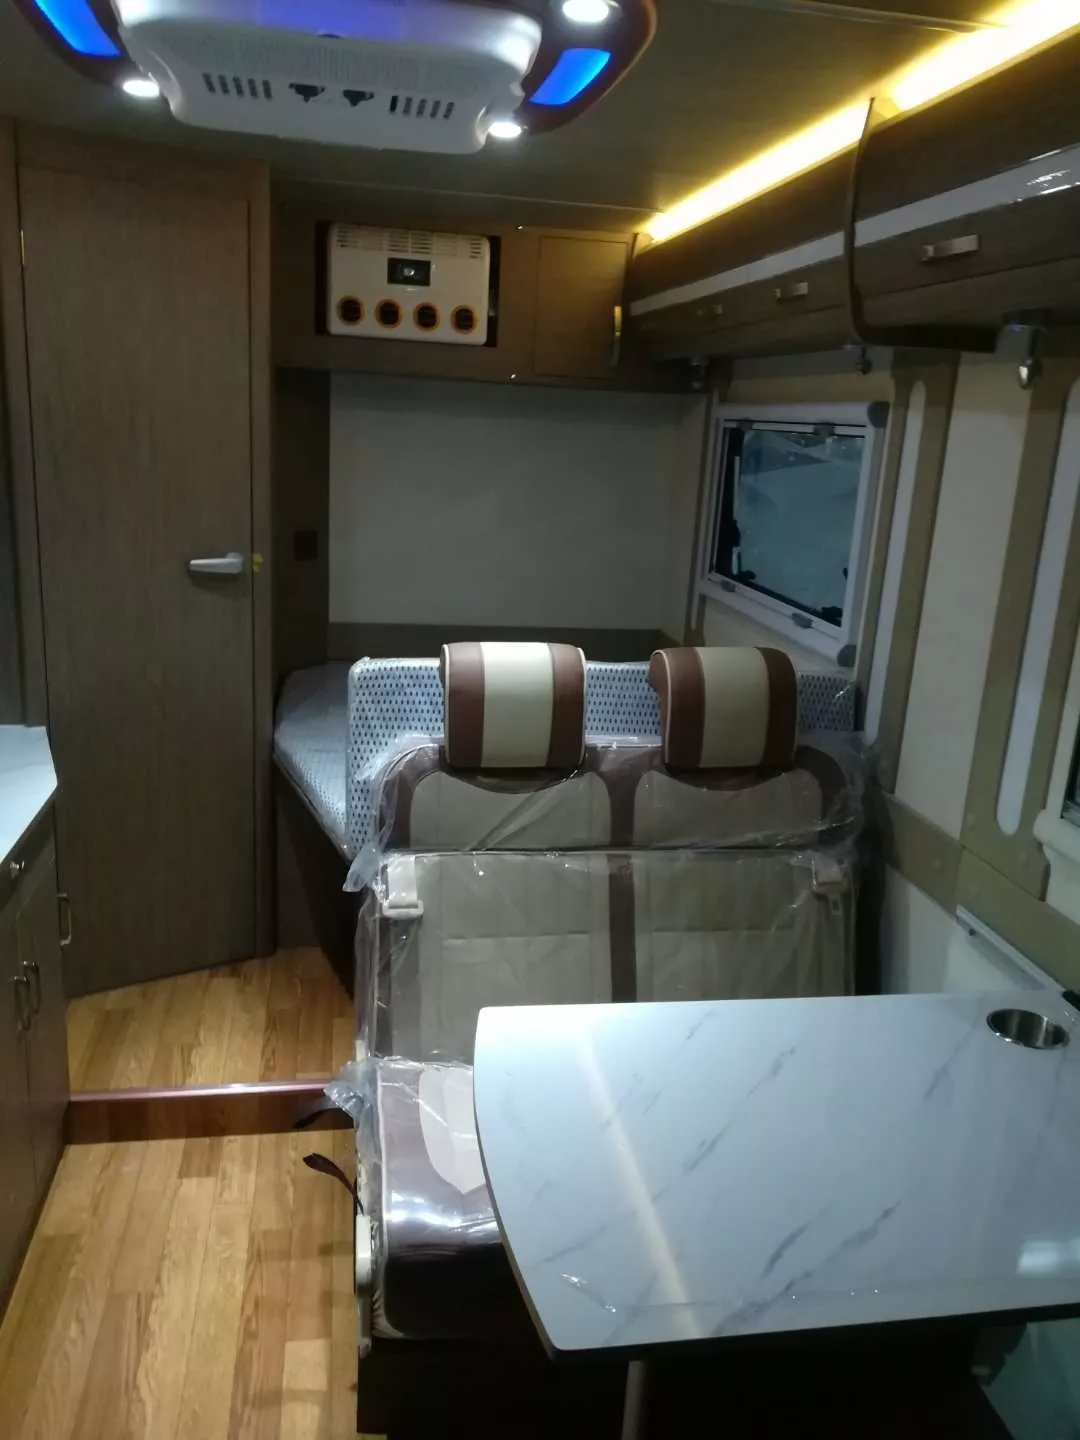 Zhonghao imported RVs joined the 5.31—6.2 Nanjing International Vacation Leisure and RV Exhibition